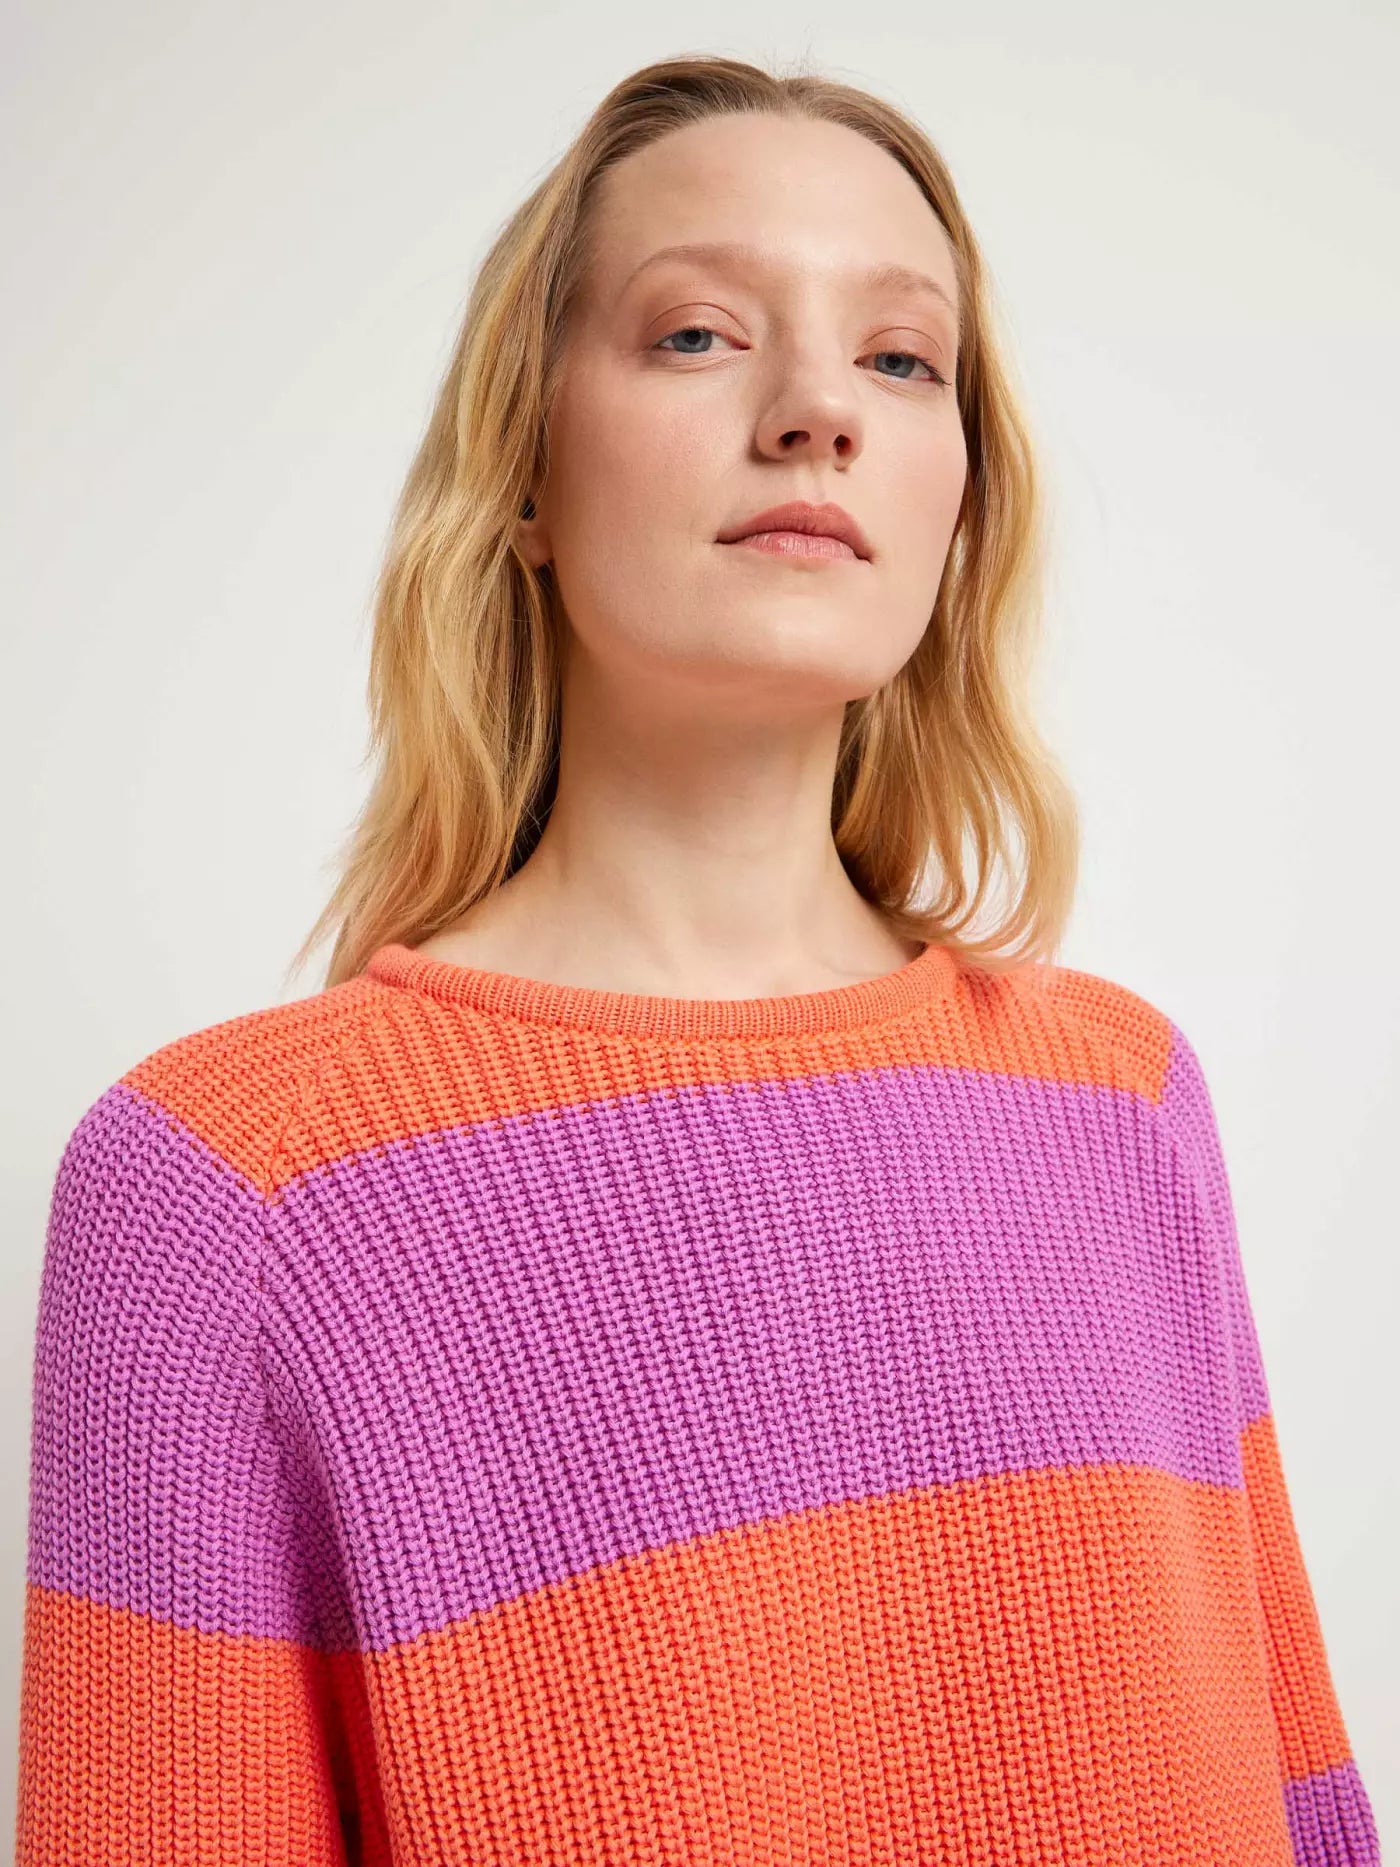 Coral and Bloom Stripe Organic Cotton Jumper